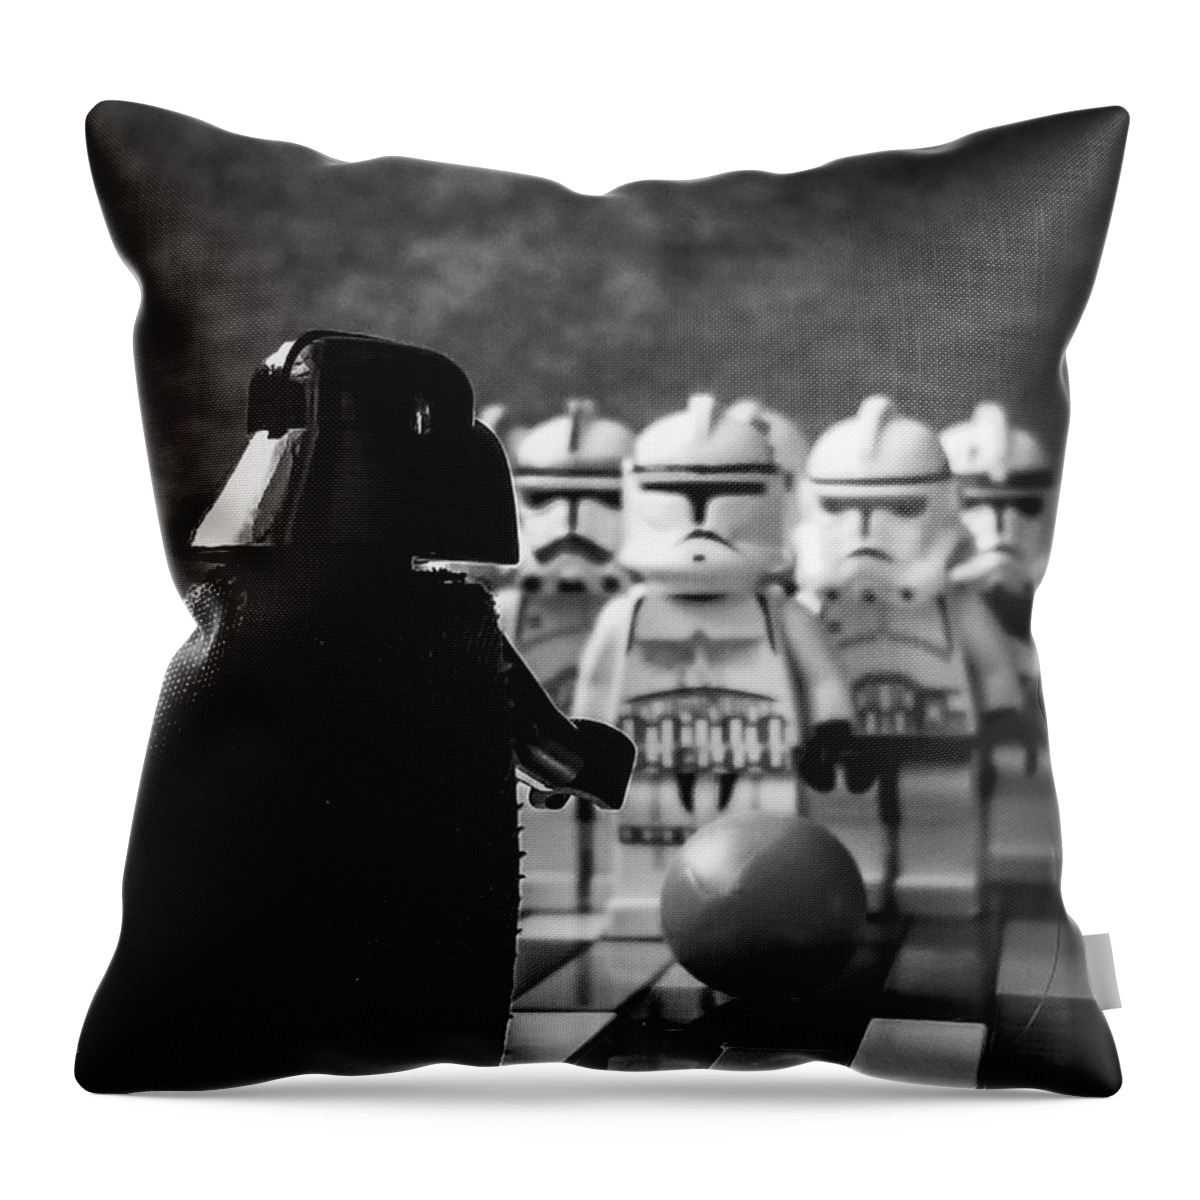 Lego Throw Pillow featuring the photograph Death Star Bowling League The Dark Side by Heather Estrada